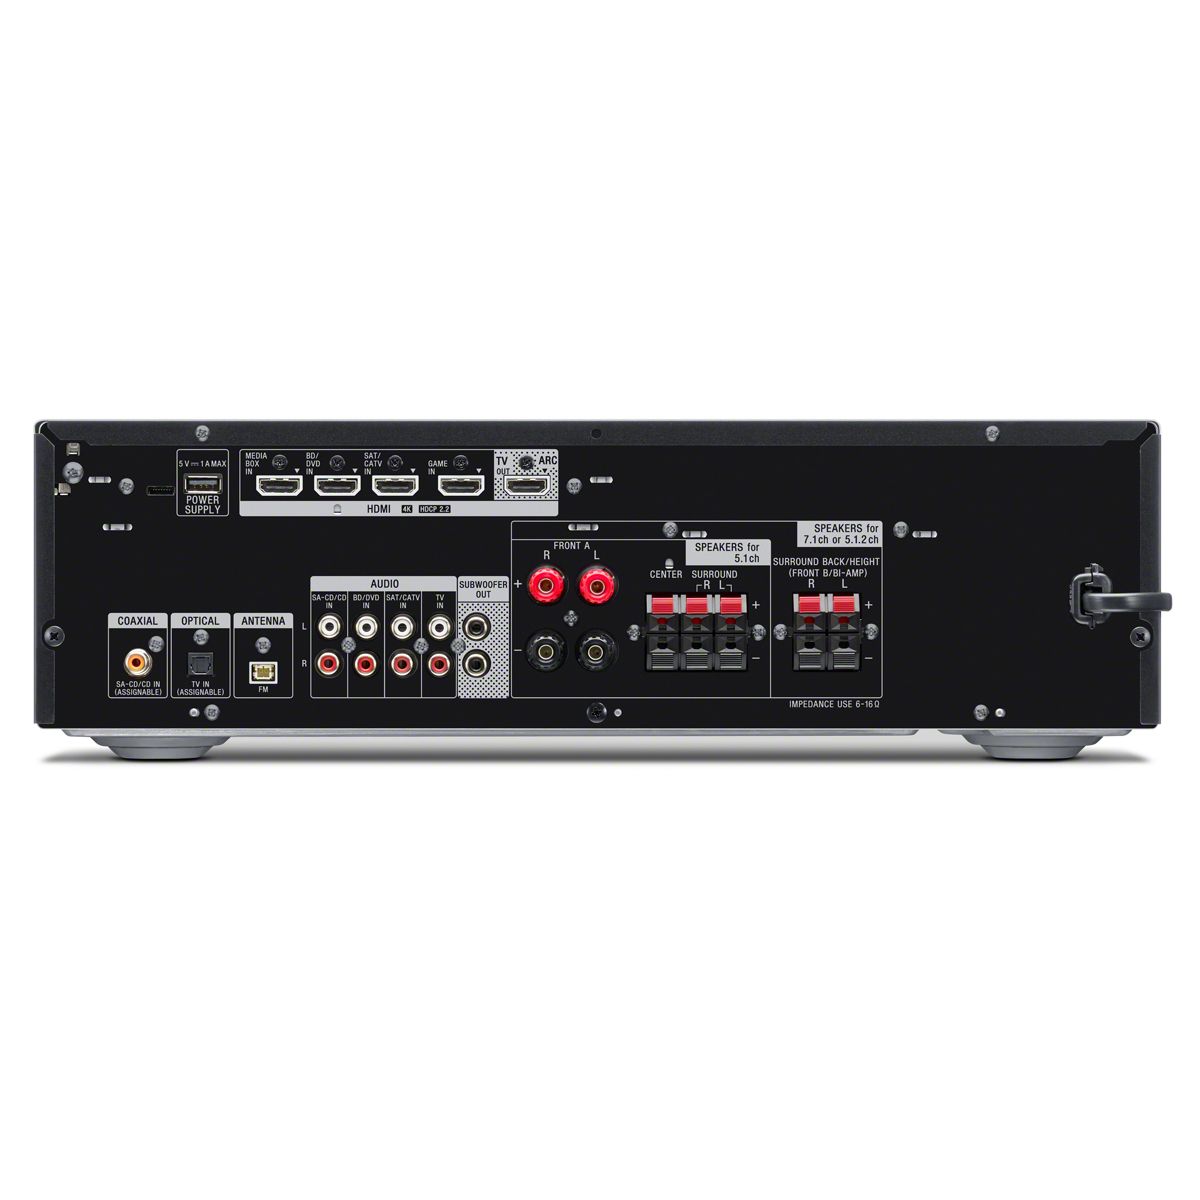 Sony STR-DH790 7.2 Channel Home Theater AV Receiver - Back view